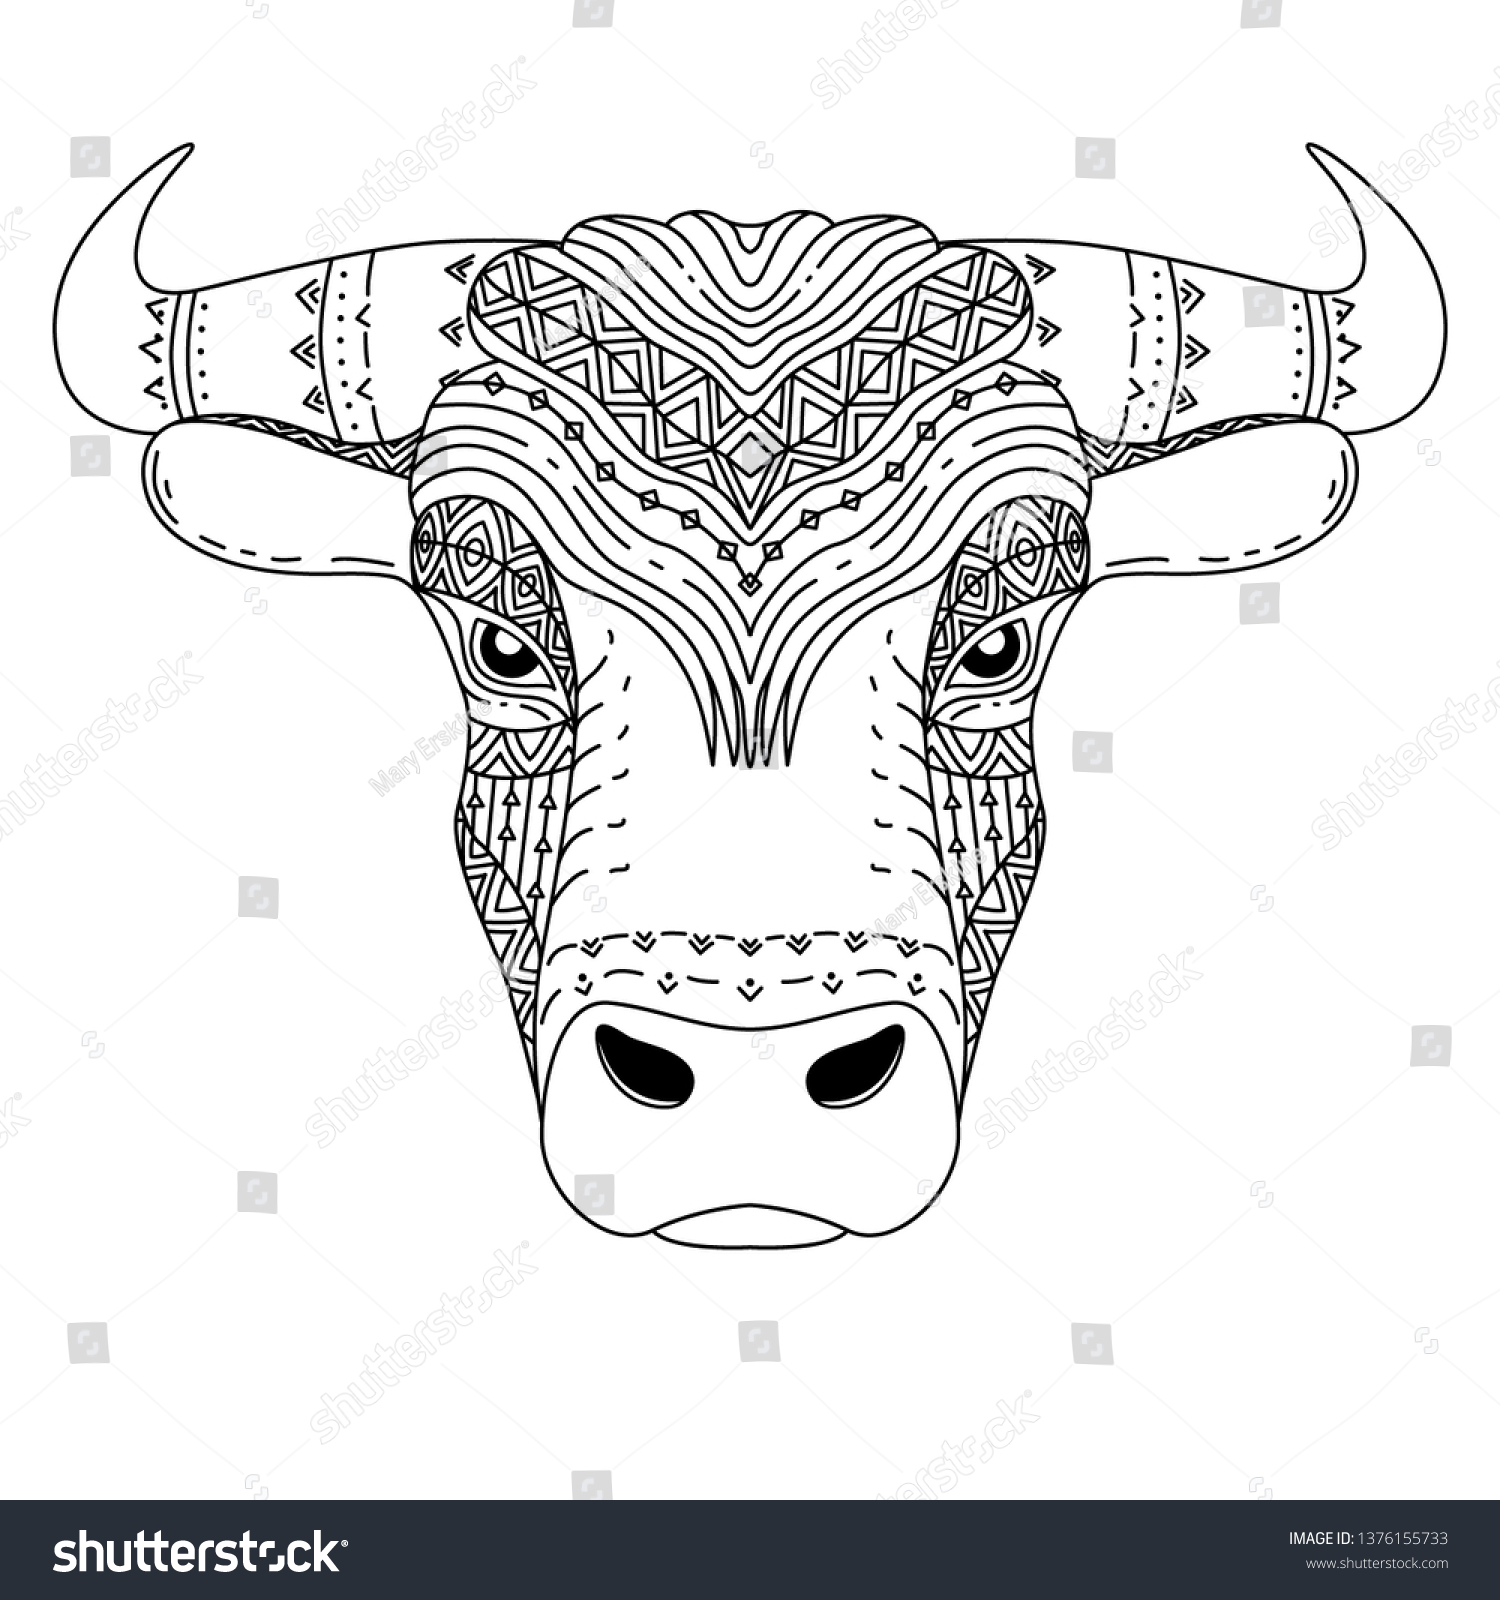 Download Vector Illustration Ox Chinese Horoscope Sign Stock Vector Royalty Free 1376155733